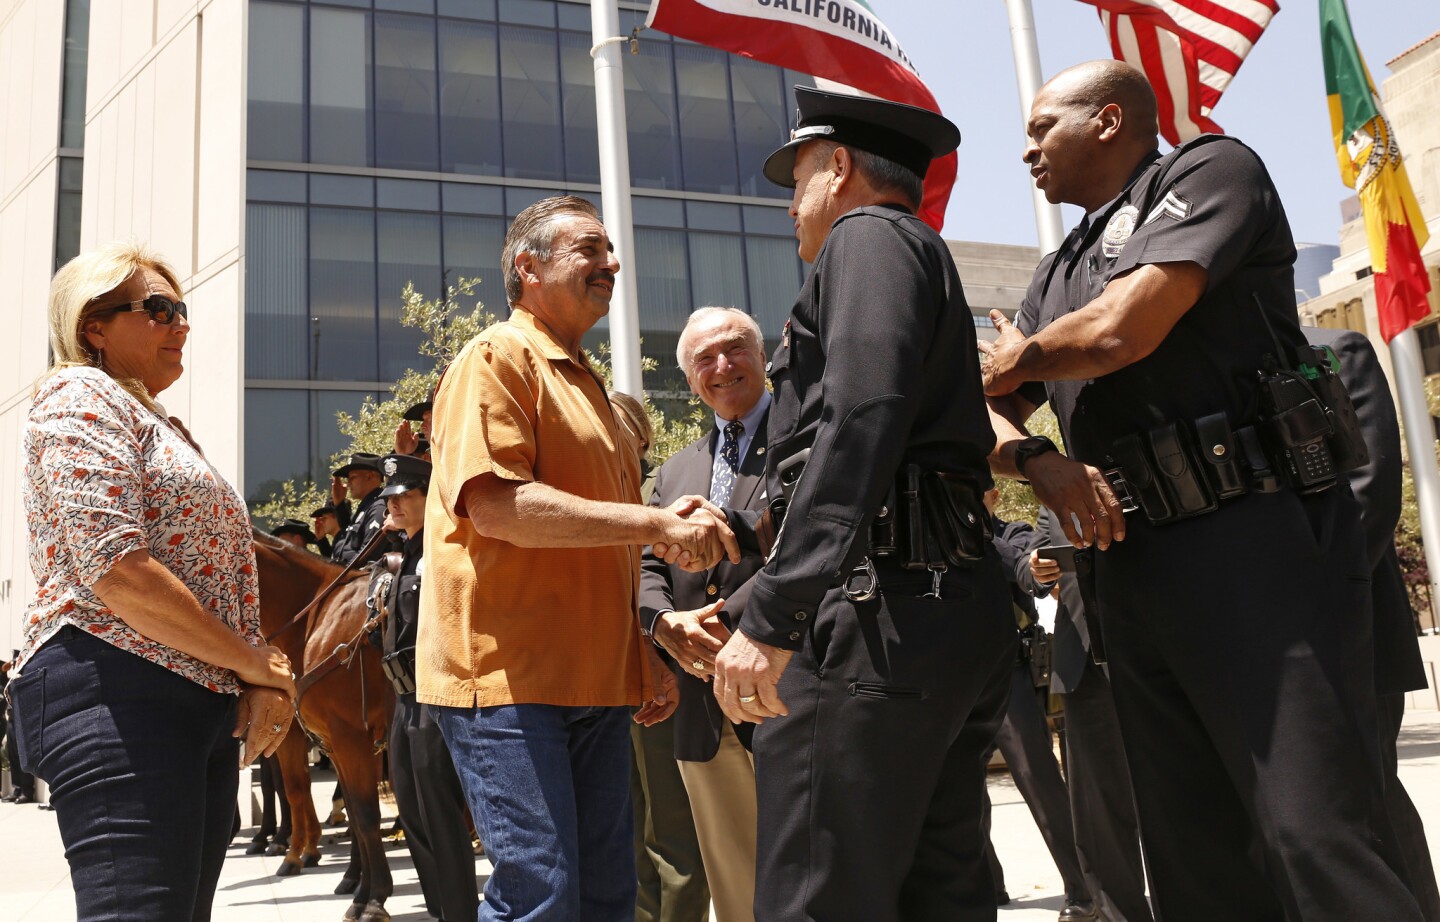 Outgoing LAPD Chief Charlie Beck, second from left, shakes hands with incoming LAPD Chief Michel Moore during a farewell ceremony for Beck outside LAPD headquarters. In center background is former LAPD Chief William Bratton.